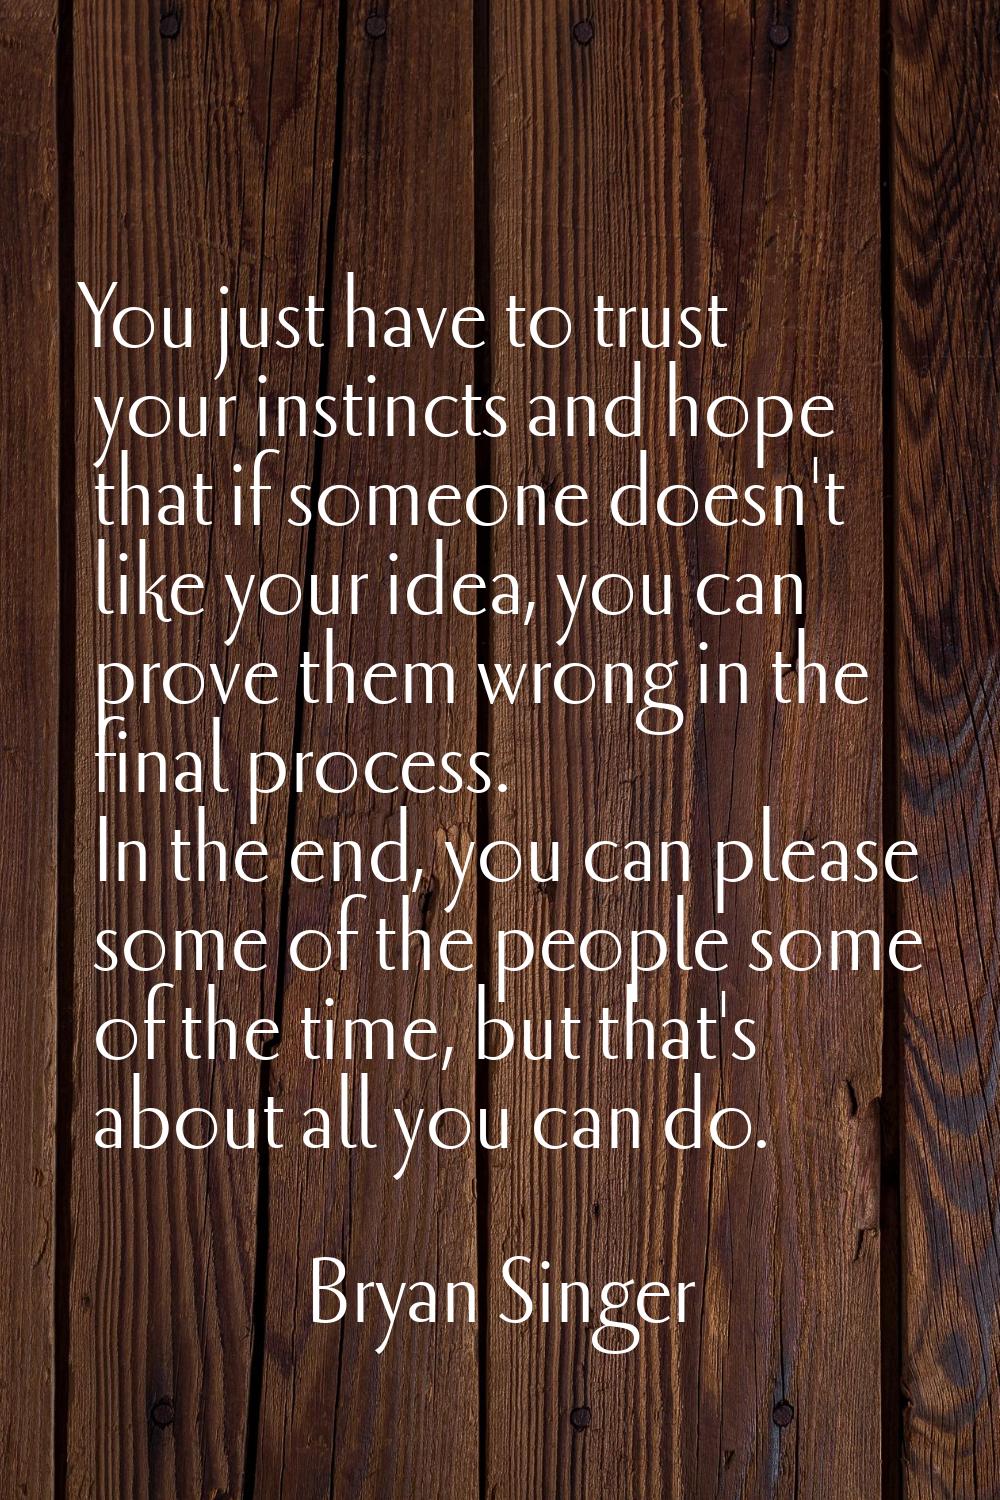 You just have to trust your instincts and hope that if someone doesn't like your idea, you can prov